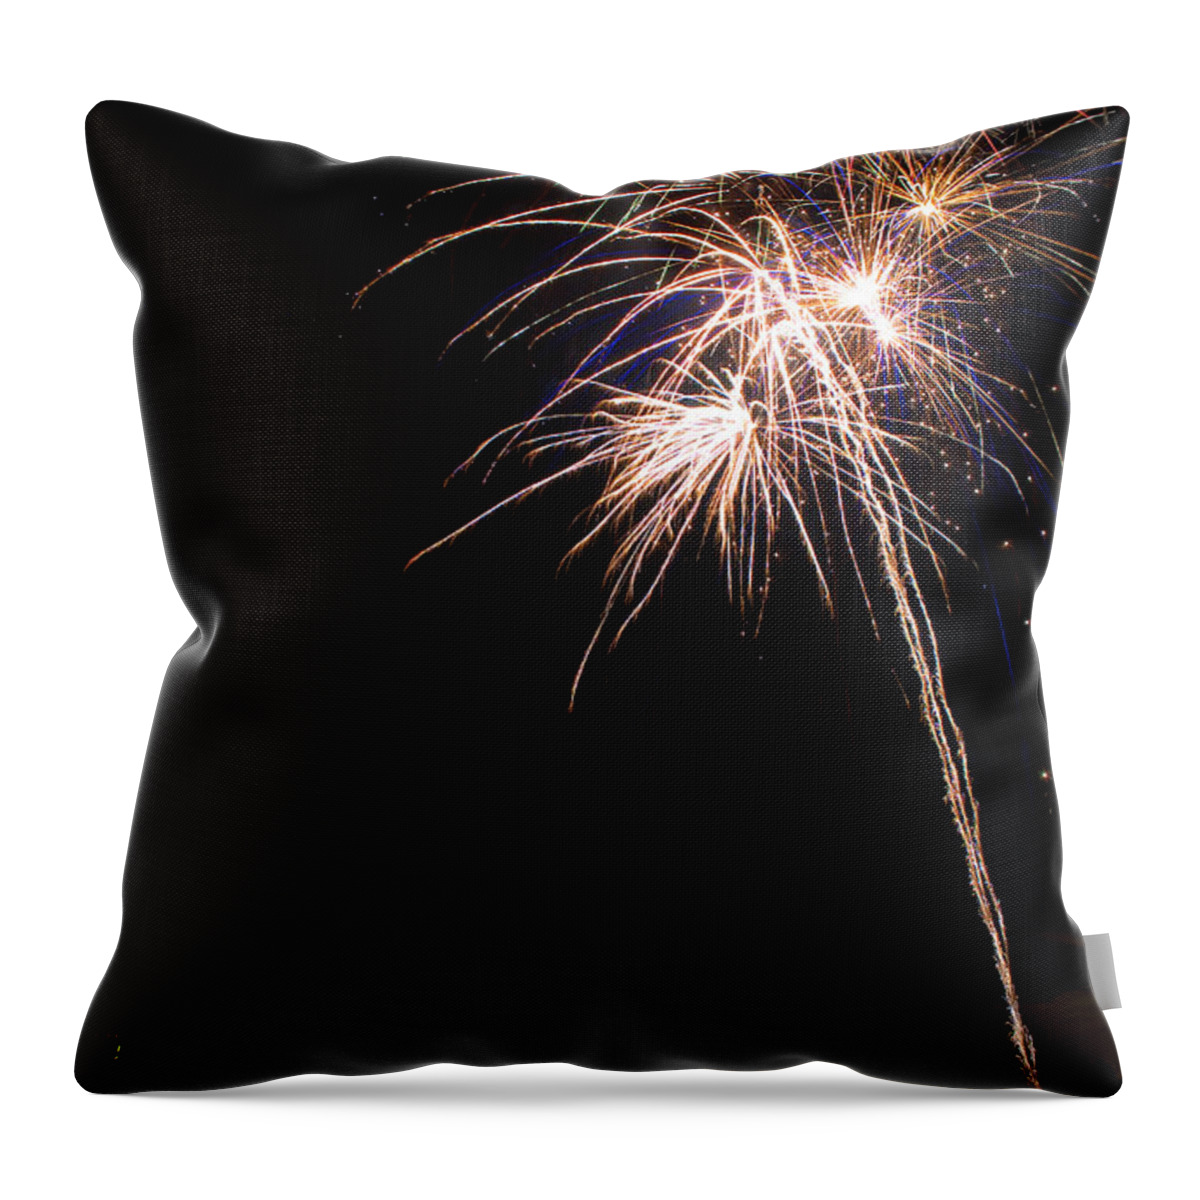 Fireworks Throw Pillow featuring the photograph Fireworks  by James BO Insogna